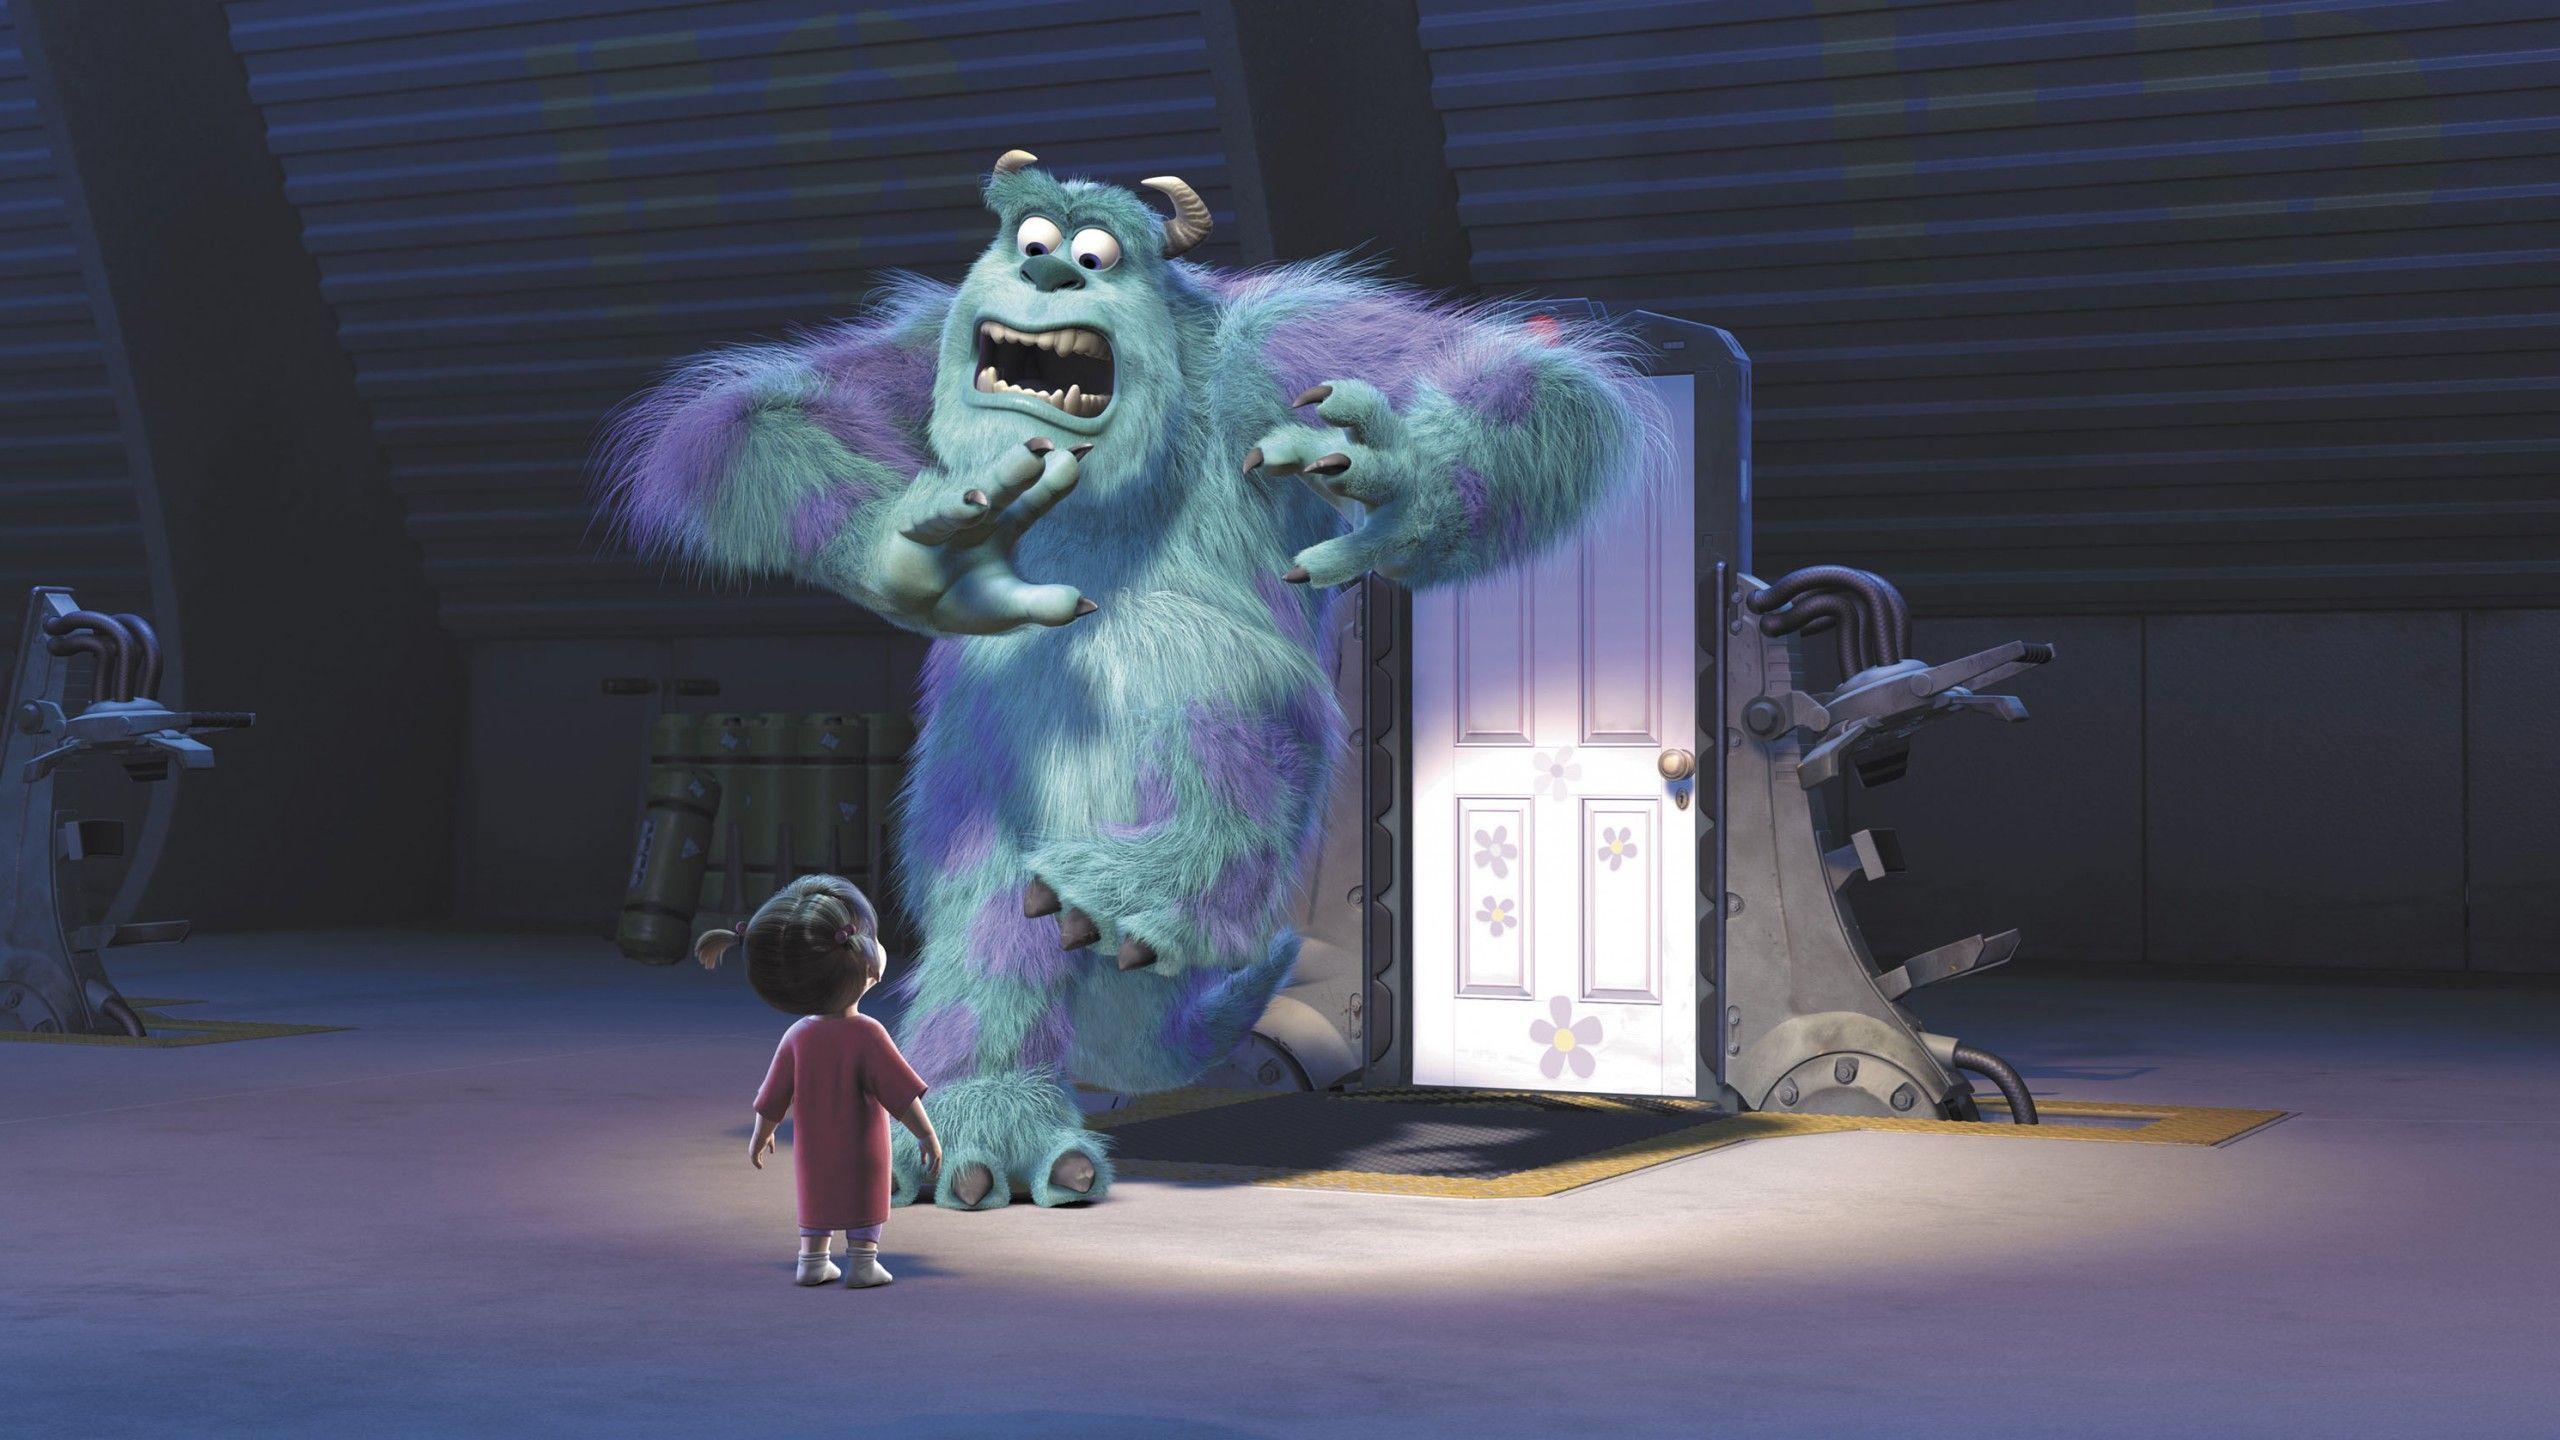 Wallpaper Boo, Sulley, Monsters Inc, Animation, Pixar, Movies